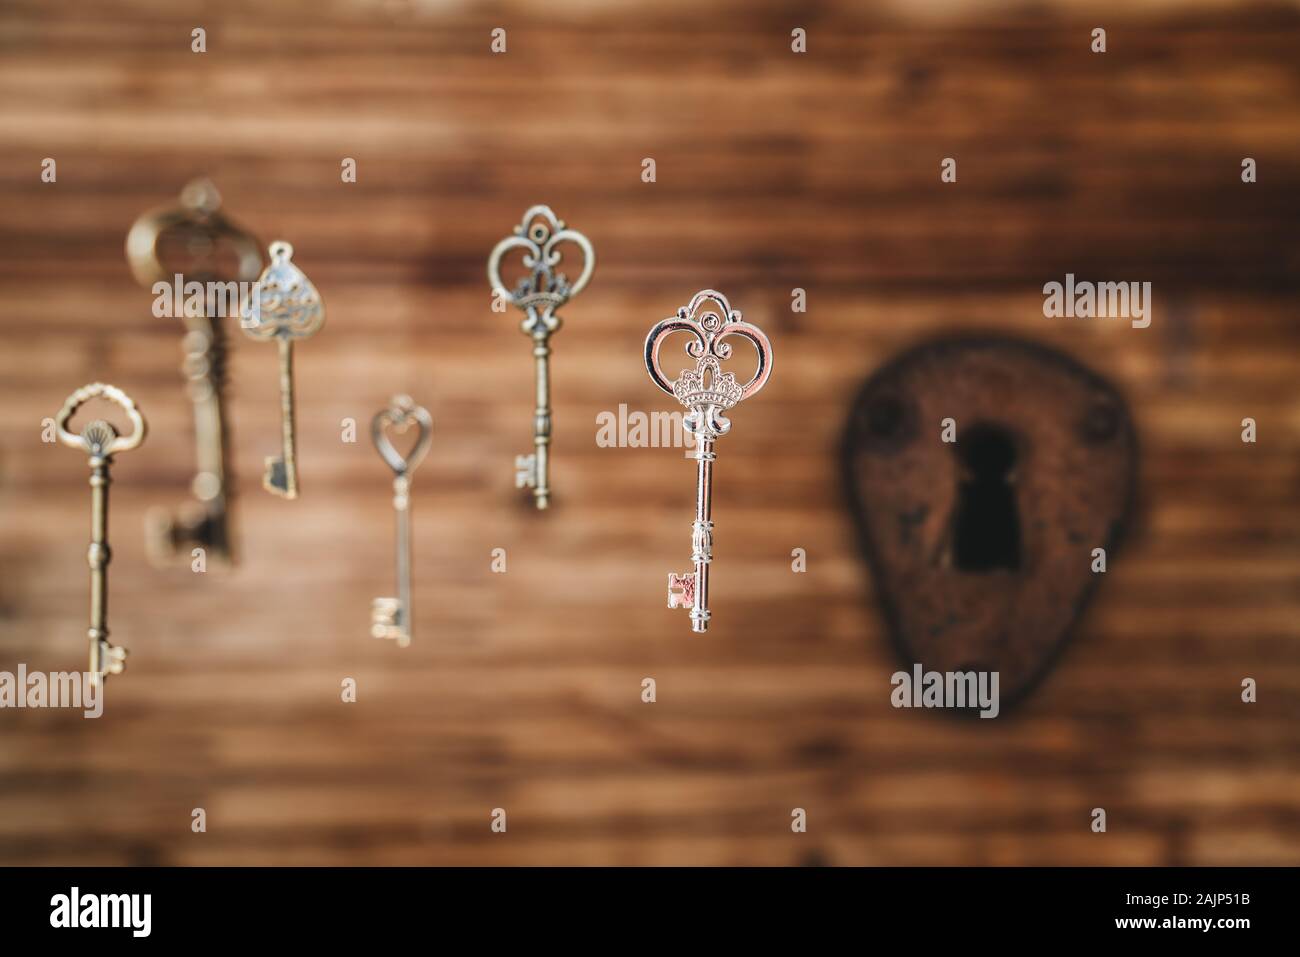 Choosing the right key, metaphorical to make right decisions. Stock Photo